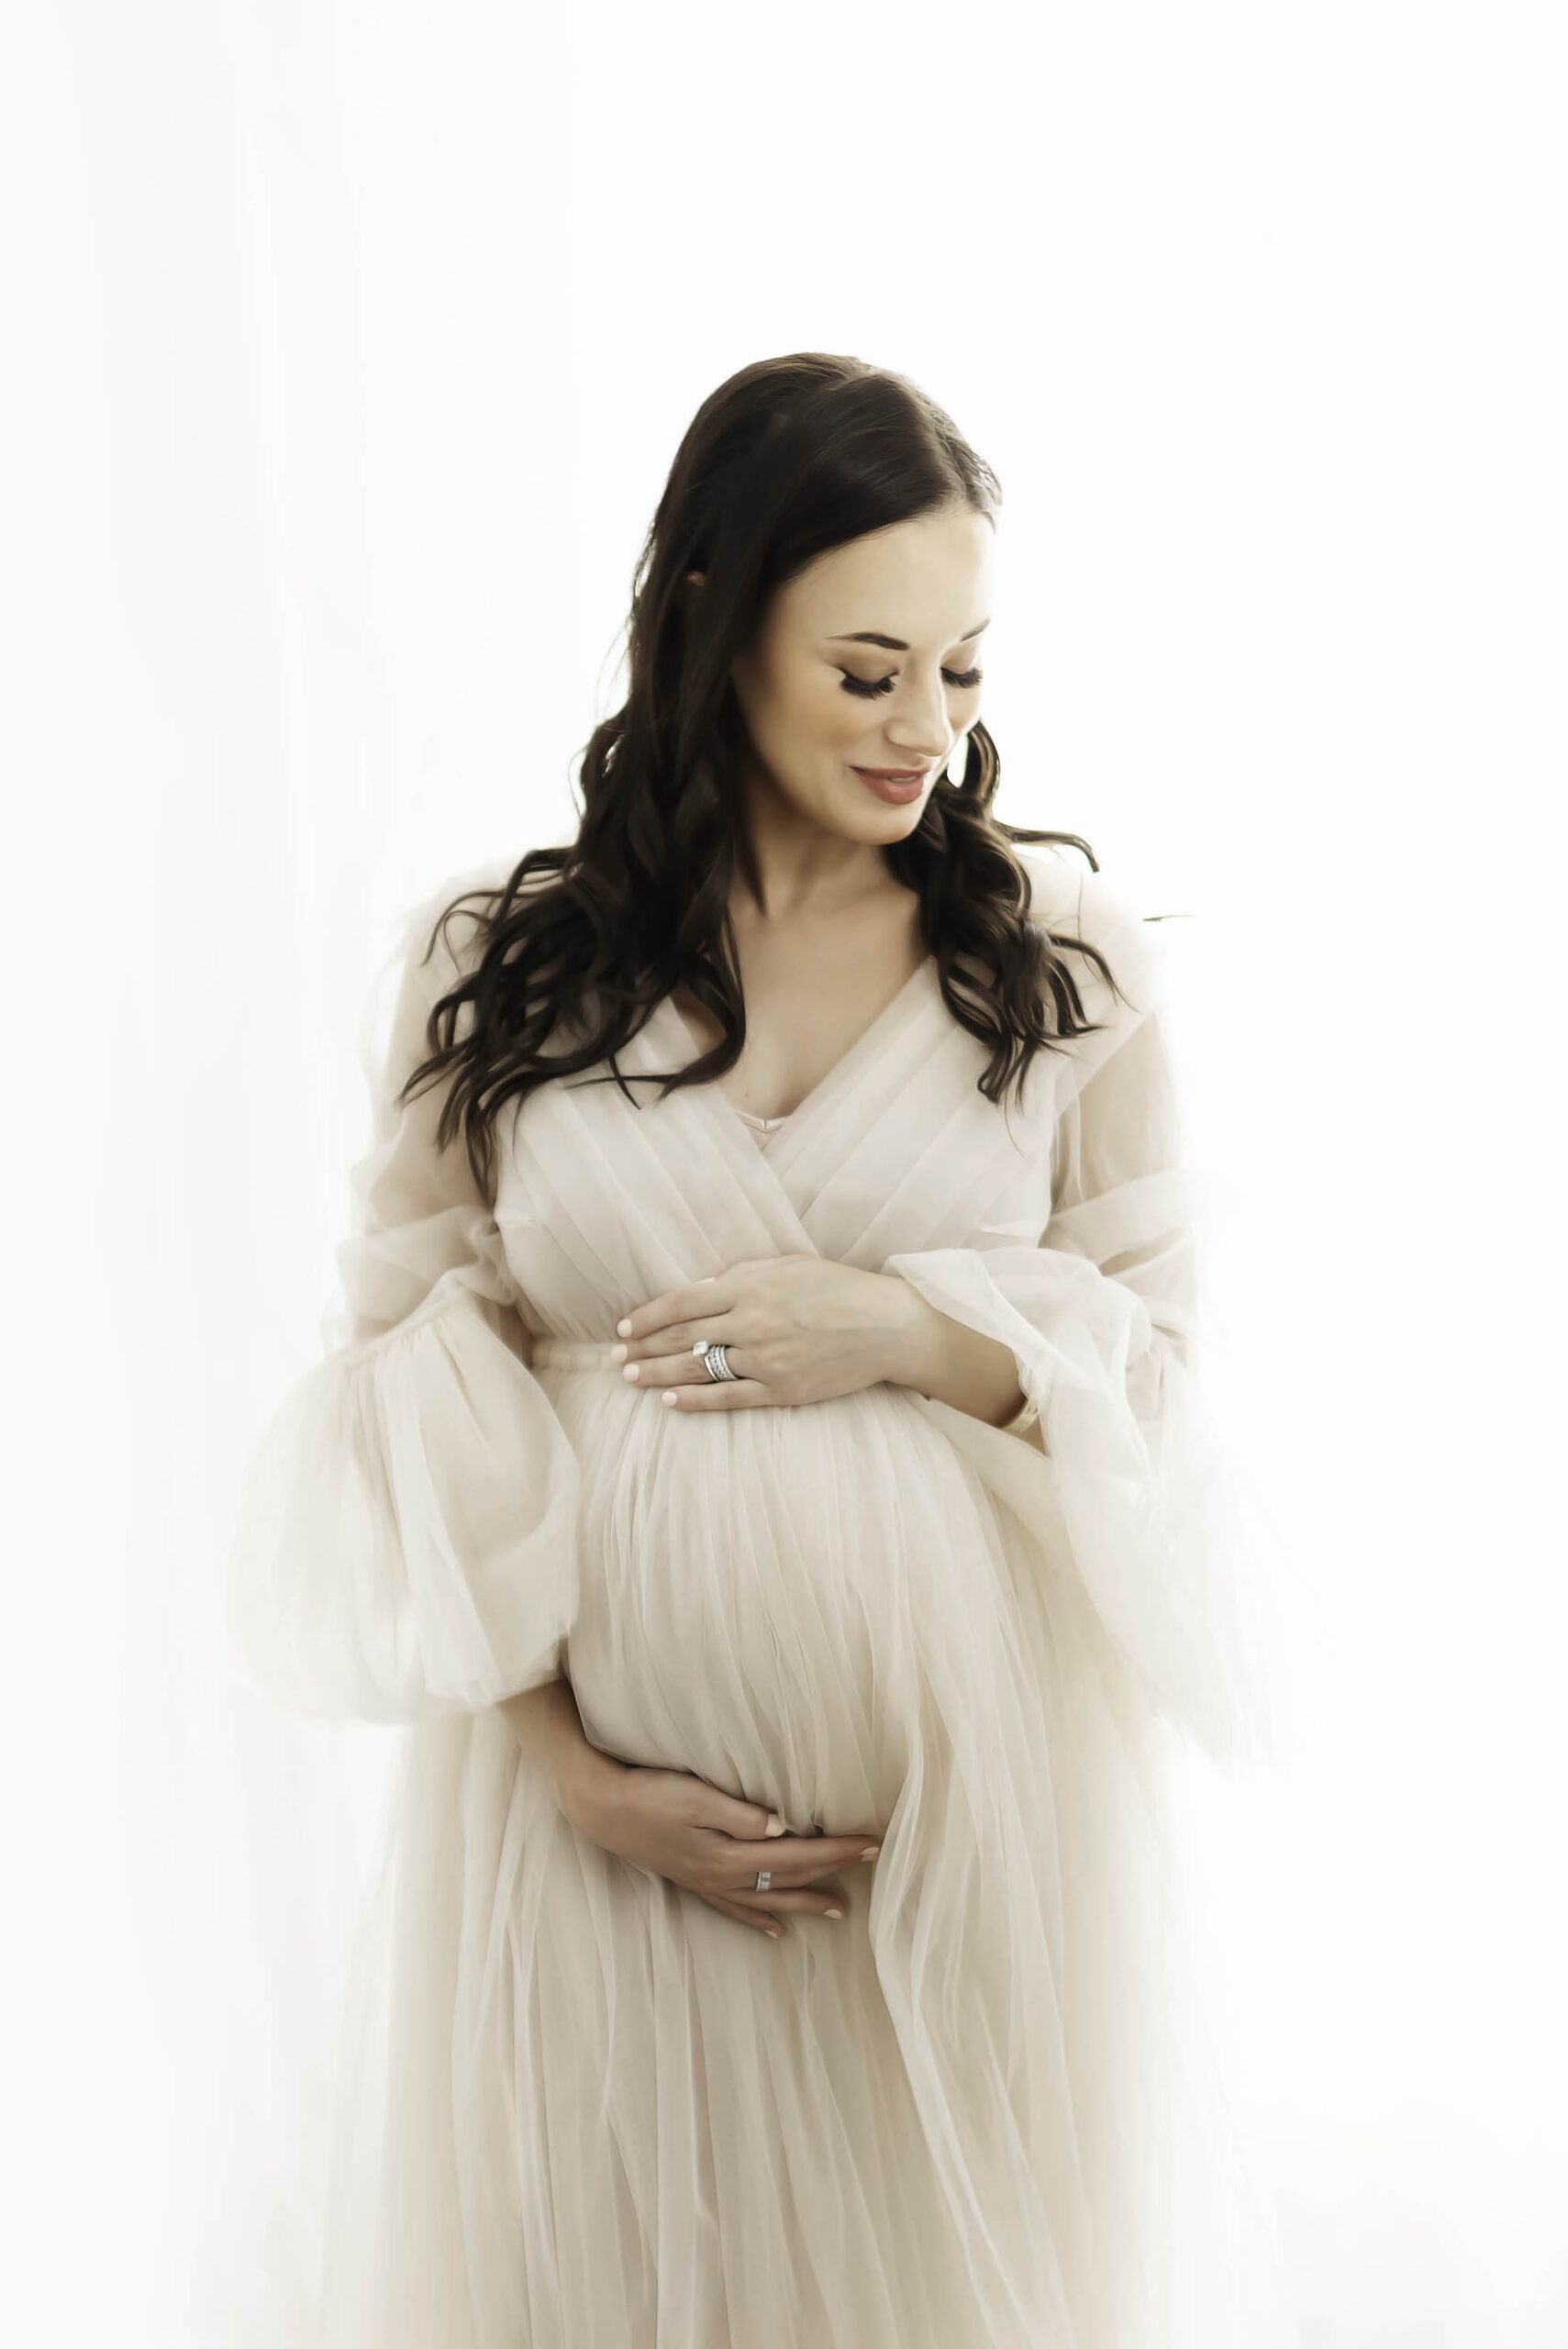 Newborn Photography Investment Information - Picture of Expecting Mom at Newborn Studio Session